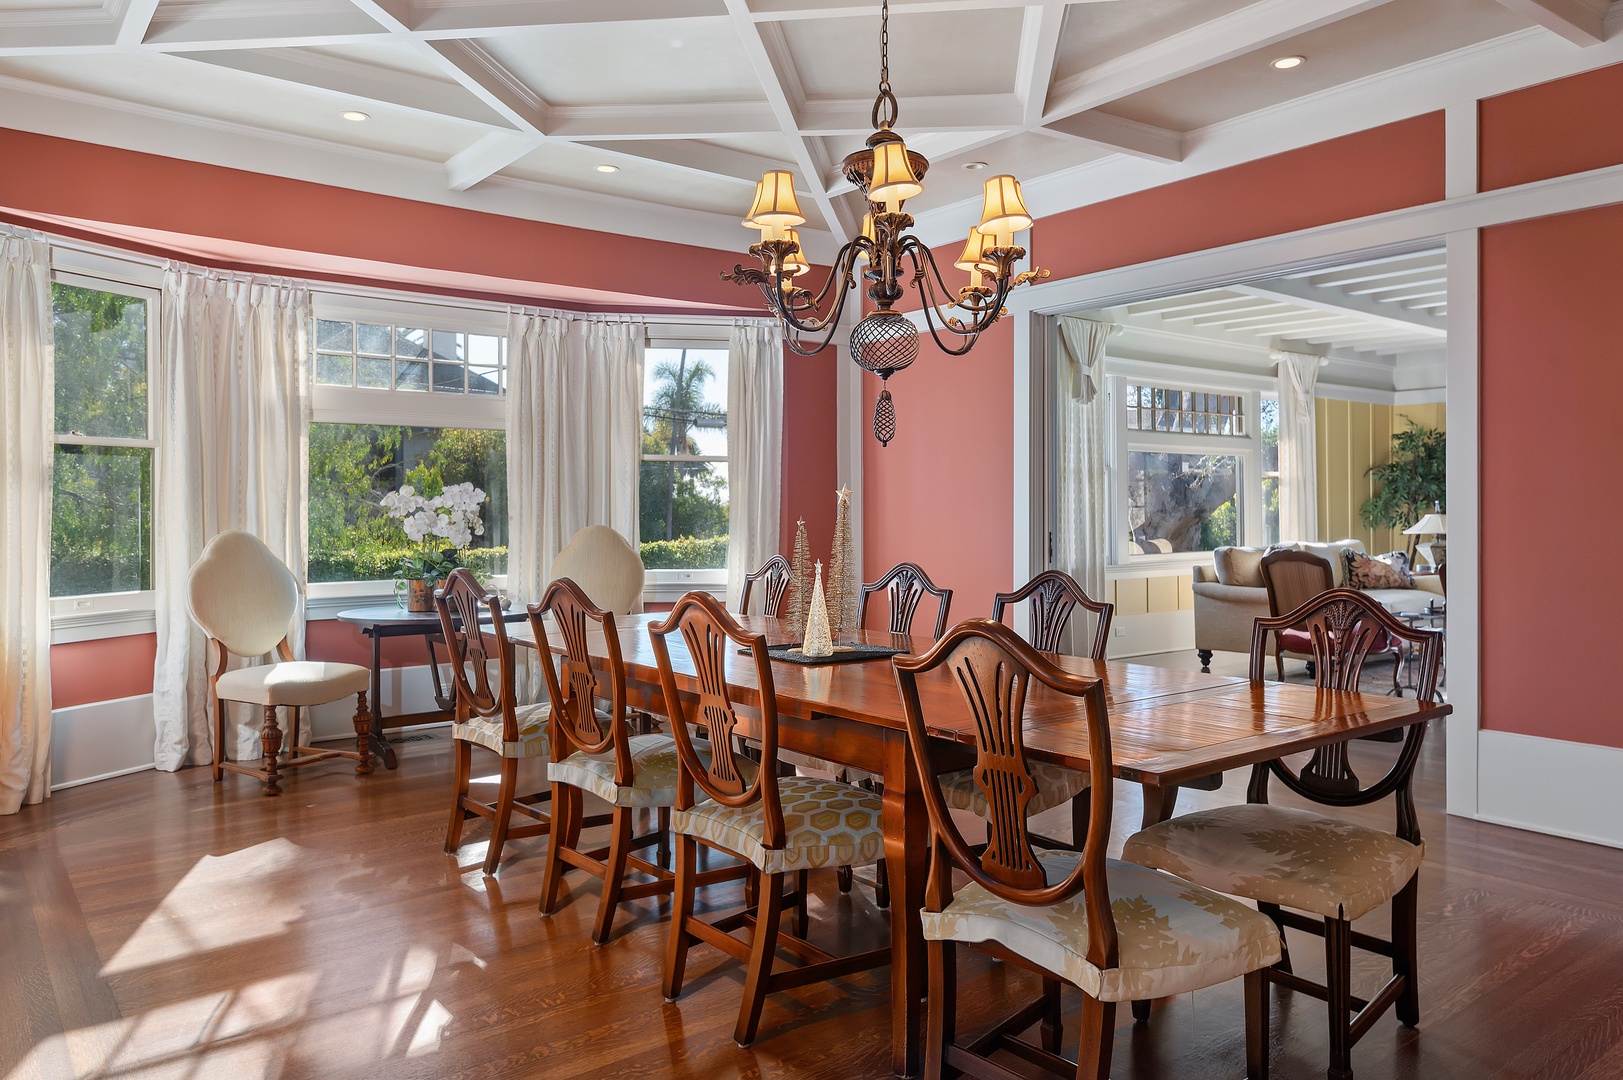 Formal dining room with table and seating for 8